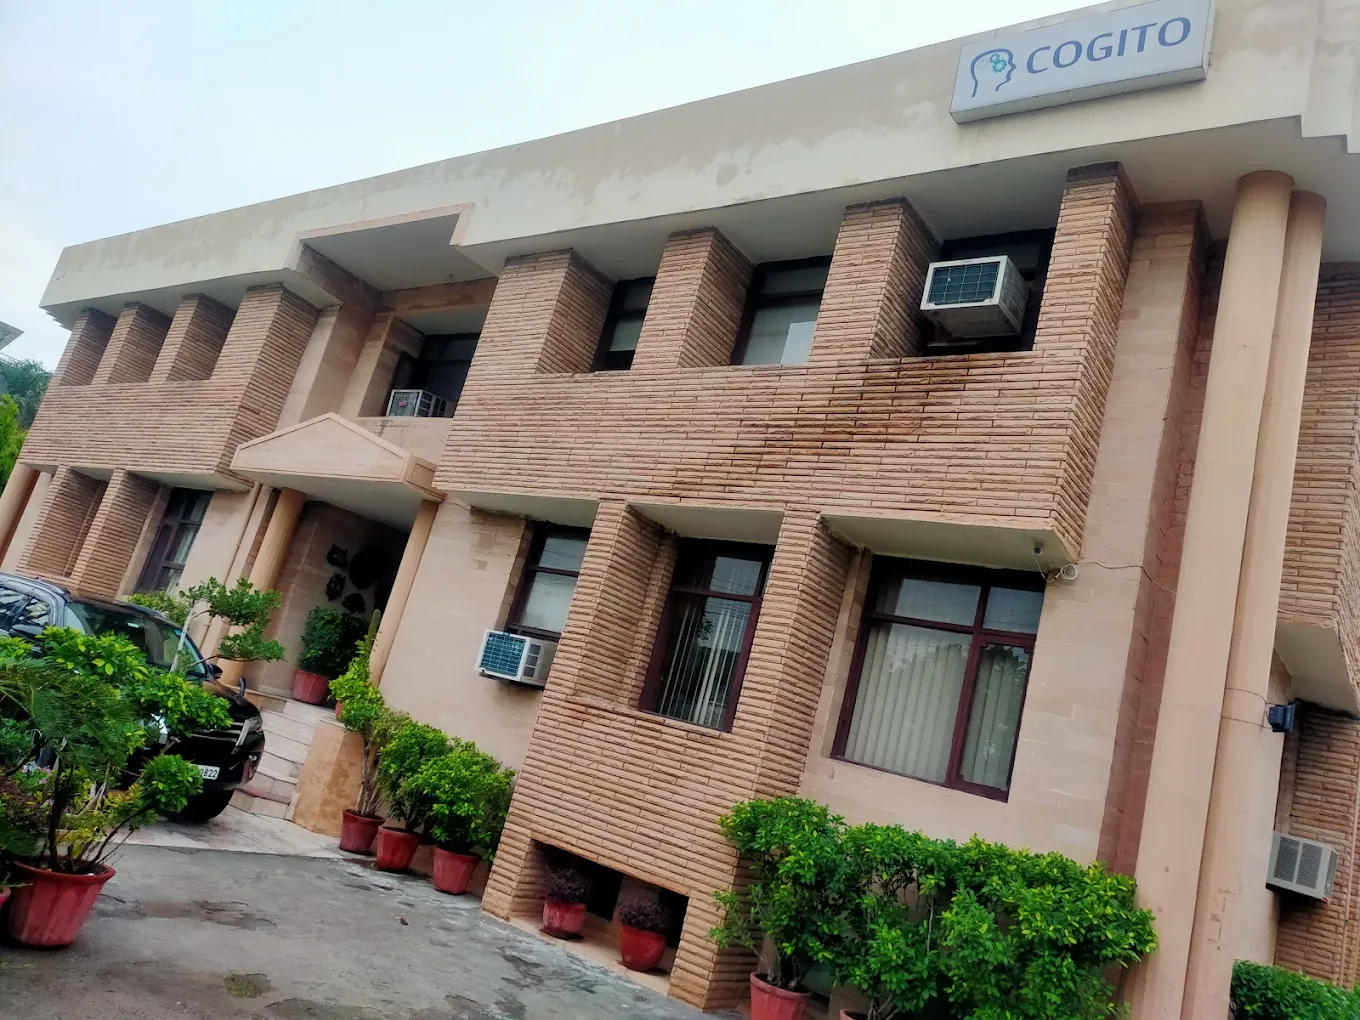 COGITO Company Fires 198 Employees Without Notice